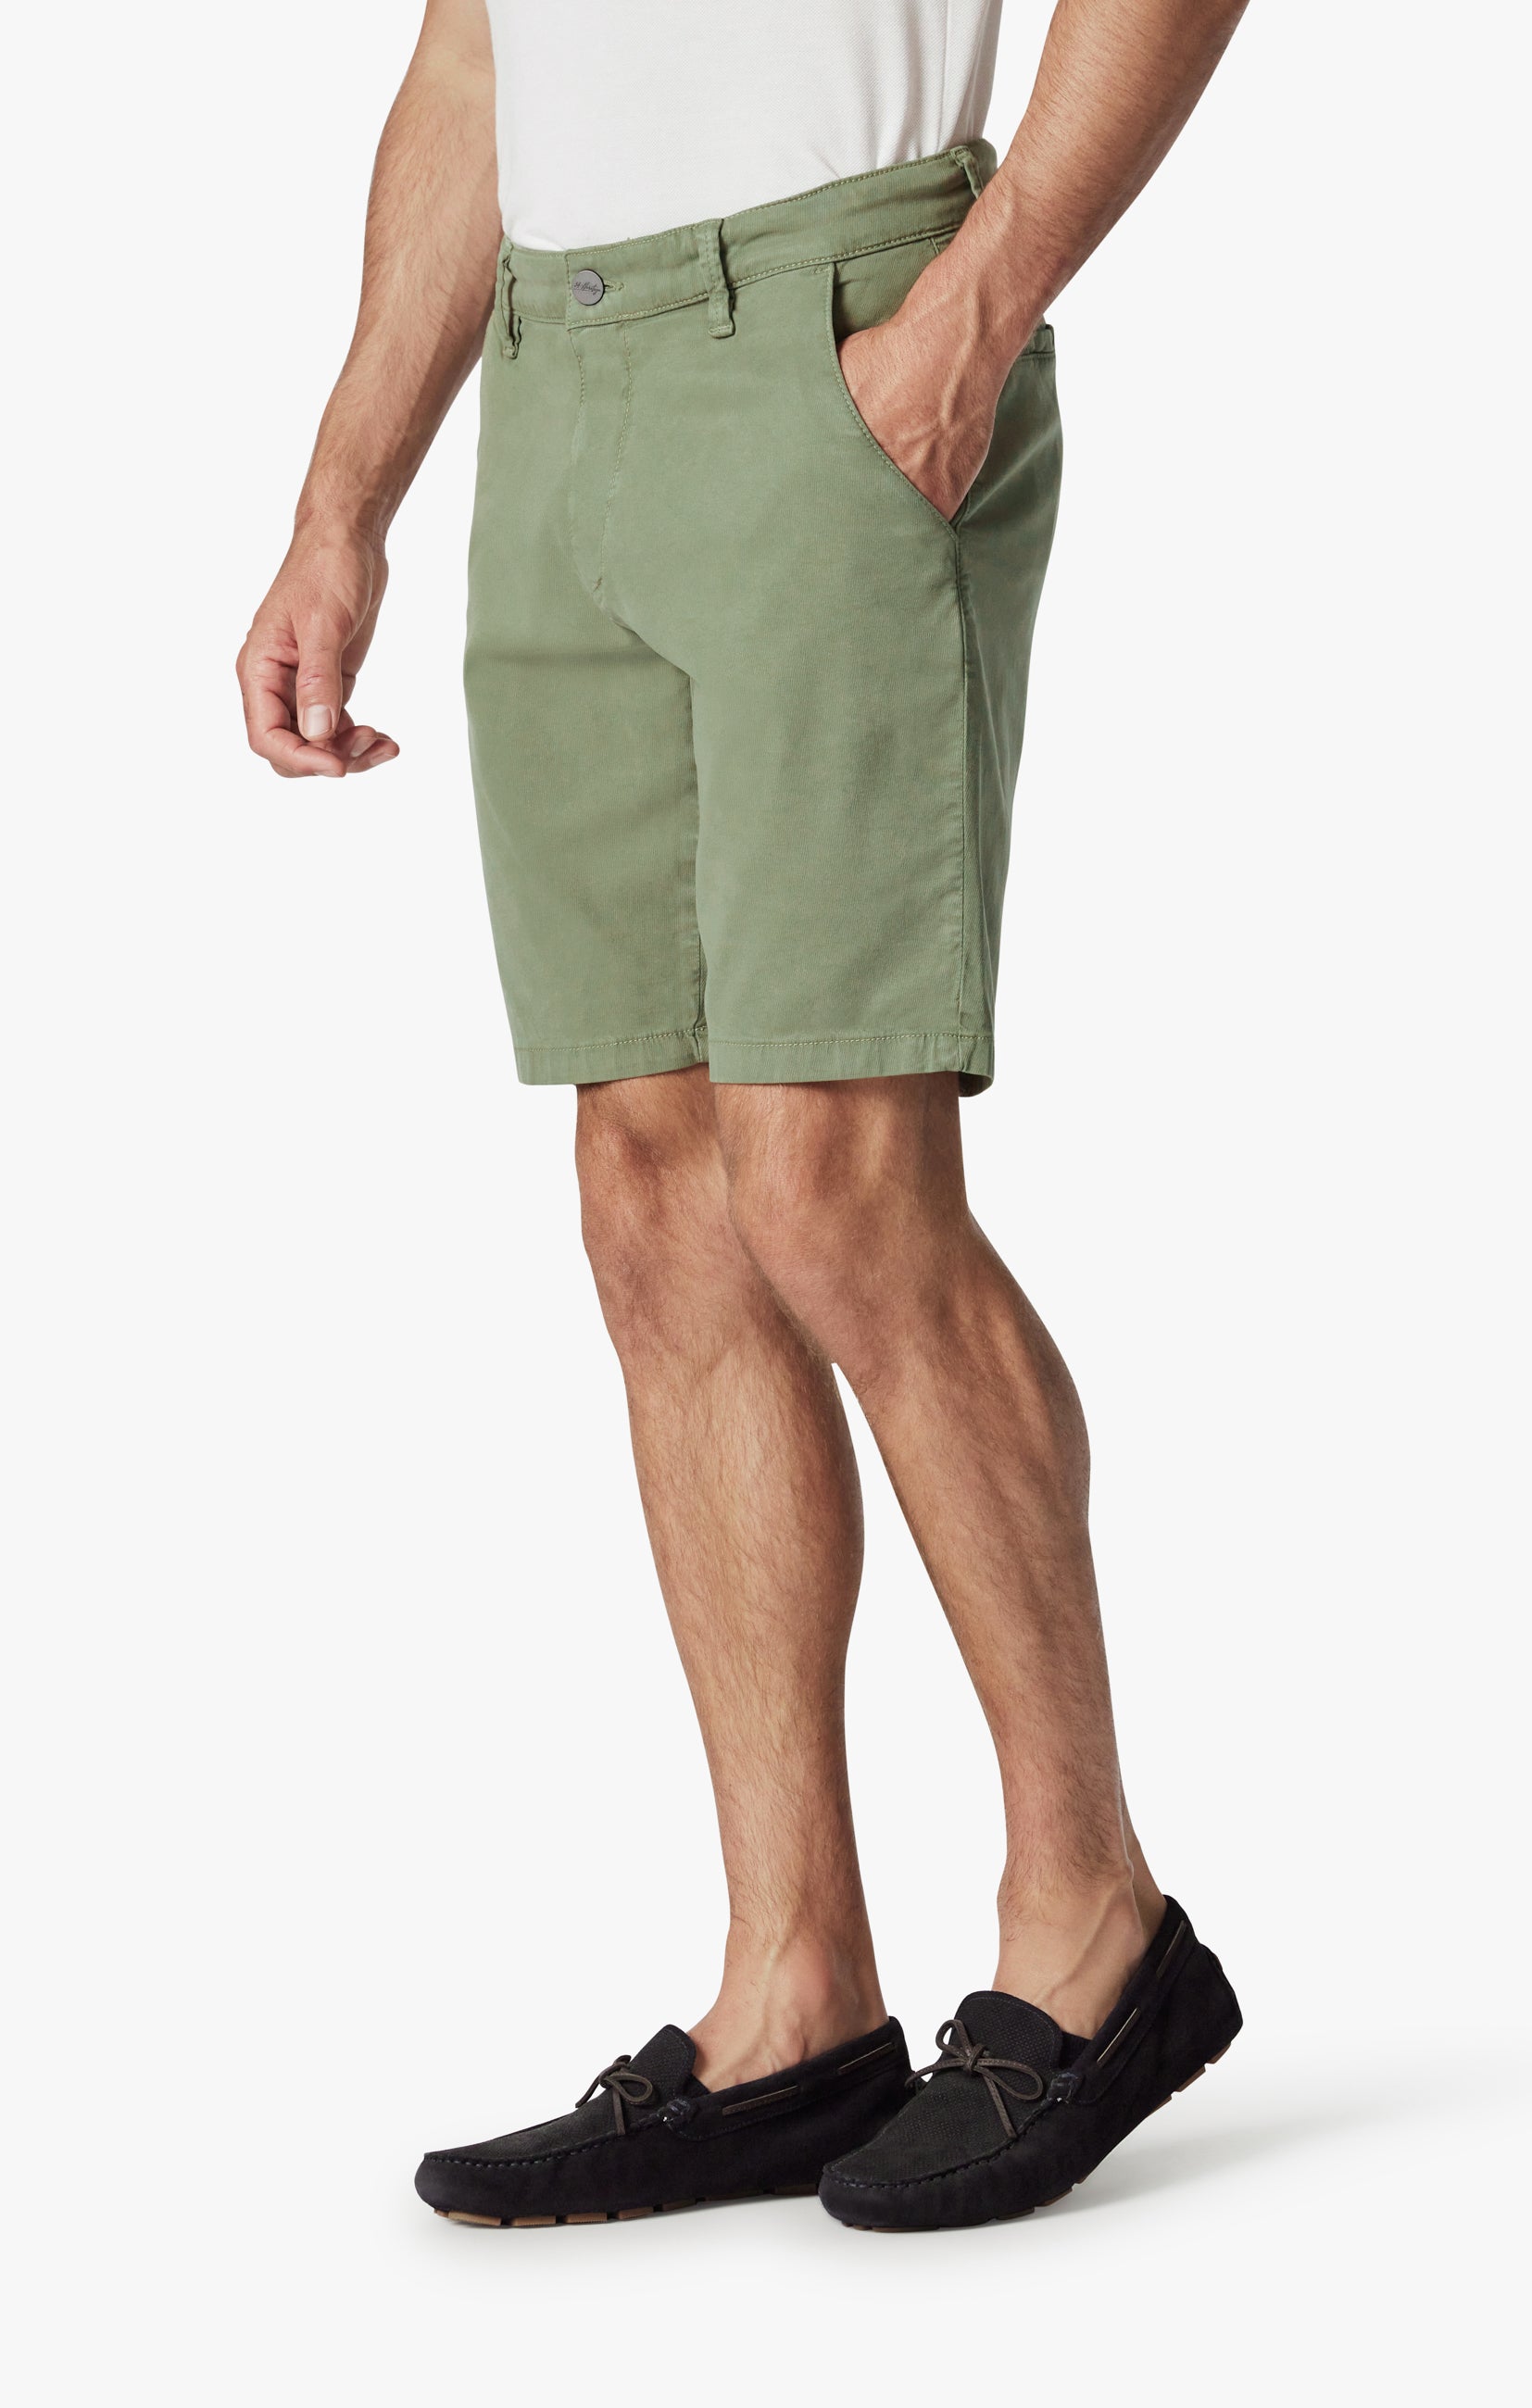 Arizona Shorts In Burnt Olive Soft Touch